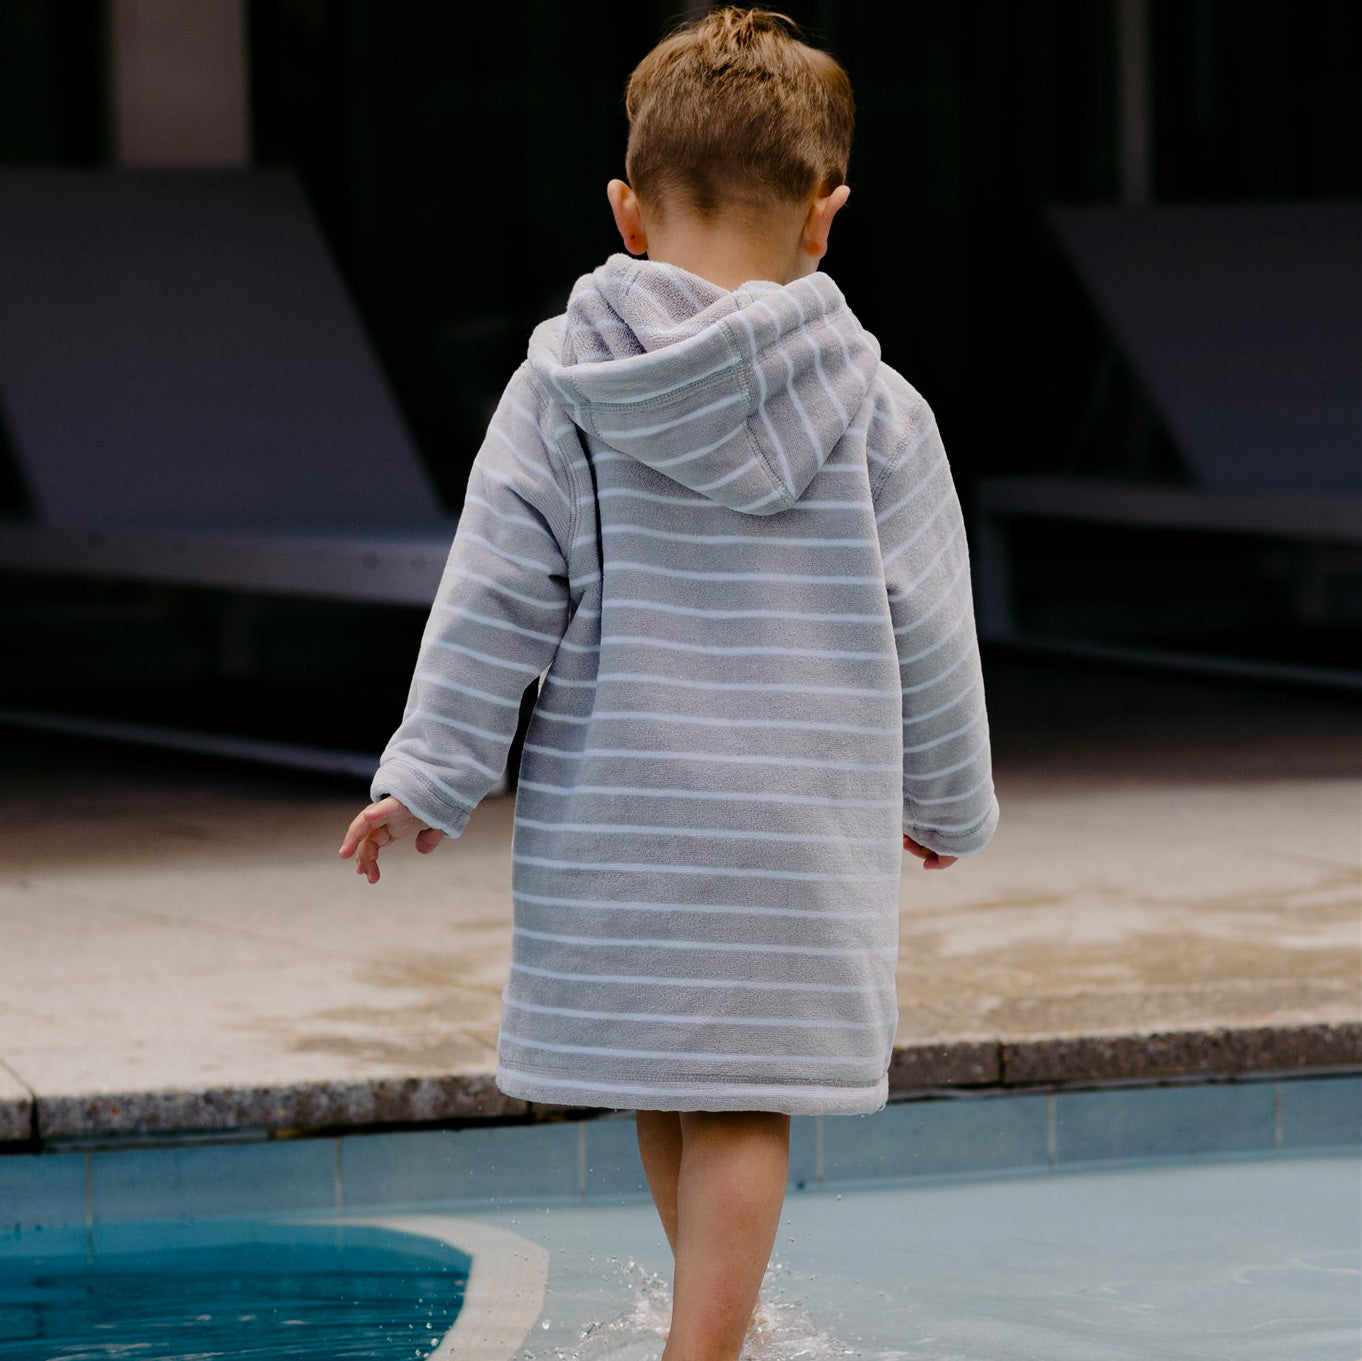 Grey Hooded Baby Towel with Lemon Trim from back - Swoodi